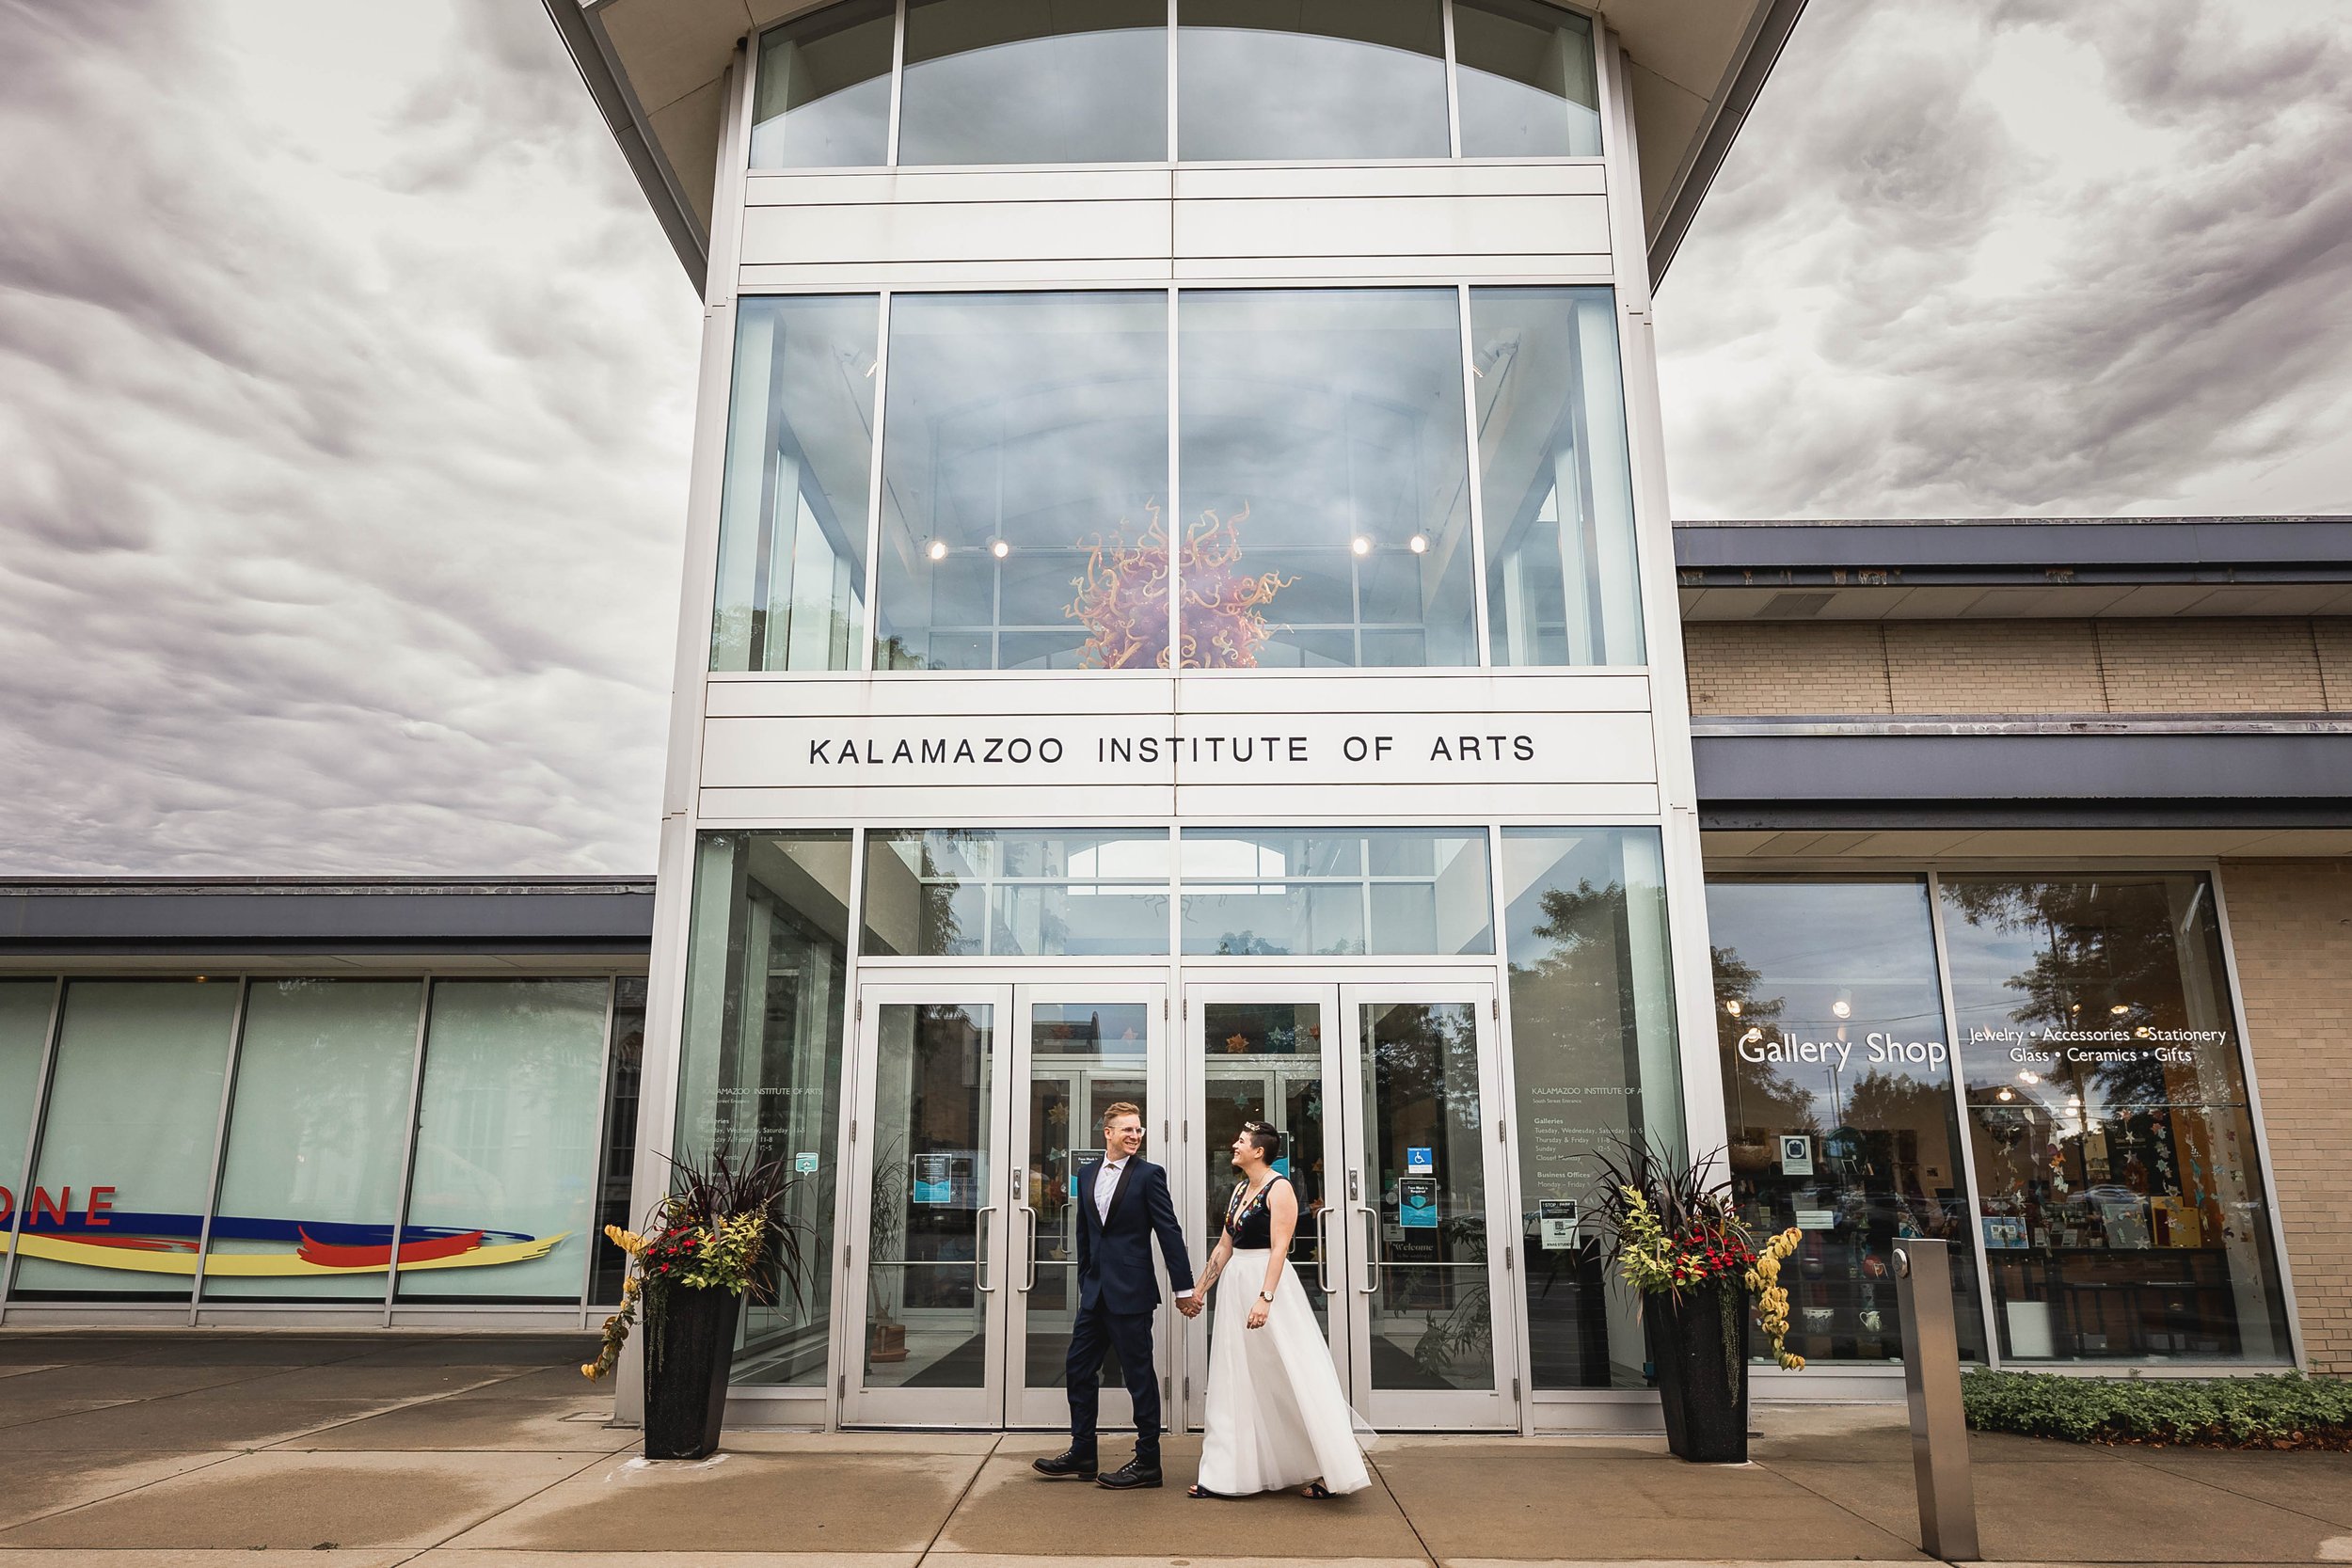  wide angle image of bride and groom walking in front of the Kalamazoo Institute of Arts  